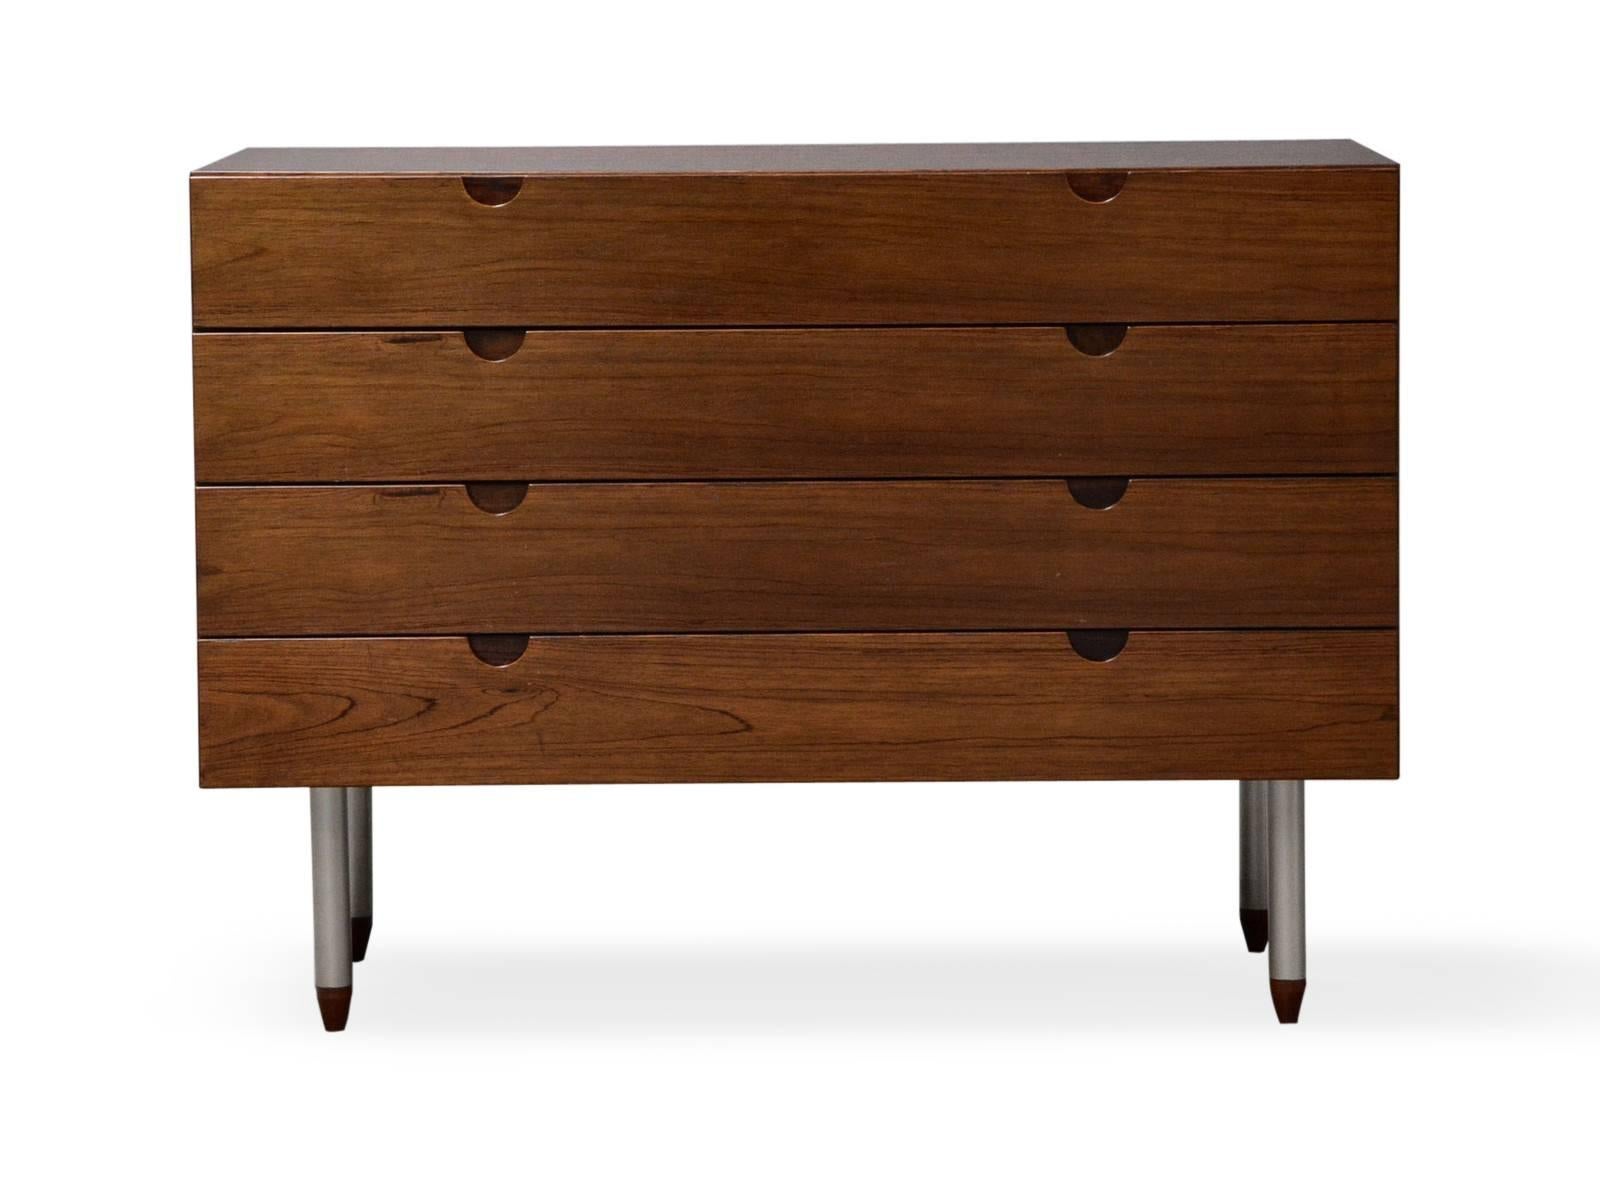 Bramin. Mahogany chest of drawers, front with four drawers, on new feet in metal and wood.
Measures: H. 73.5 cm, L. 100 cm, D. 46.5 cm.
Normal wear due to age, including bumps and scrapes.